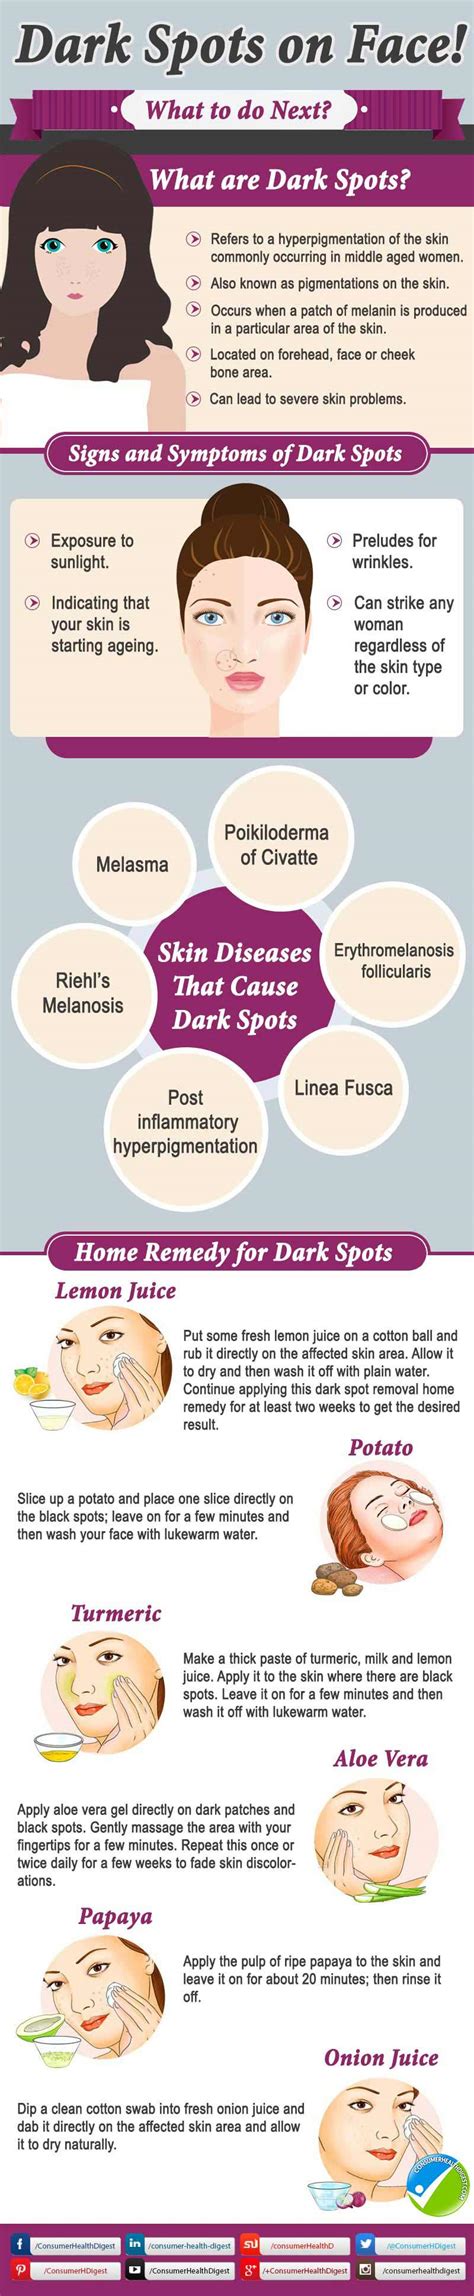 Dark Spots On Face Causes And Treatments